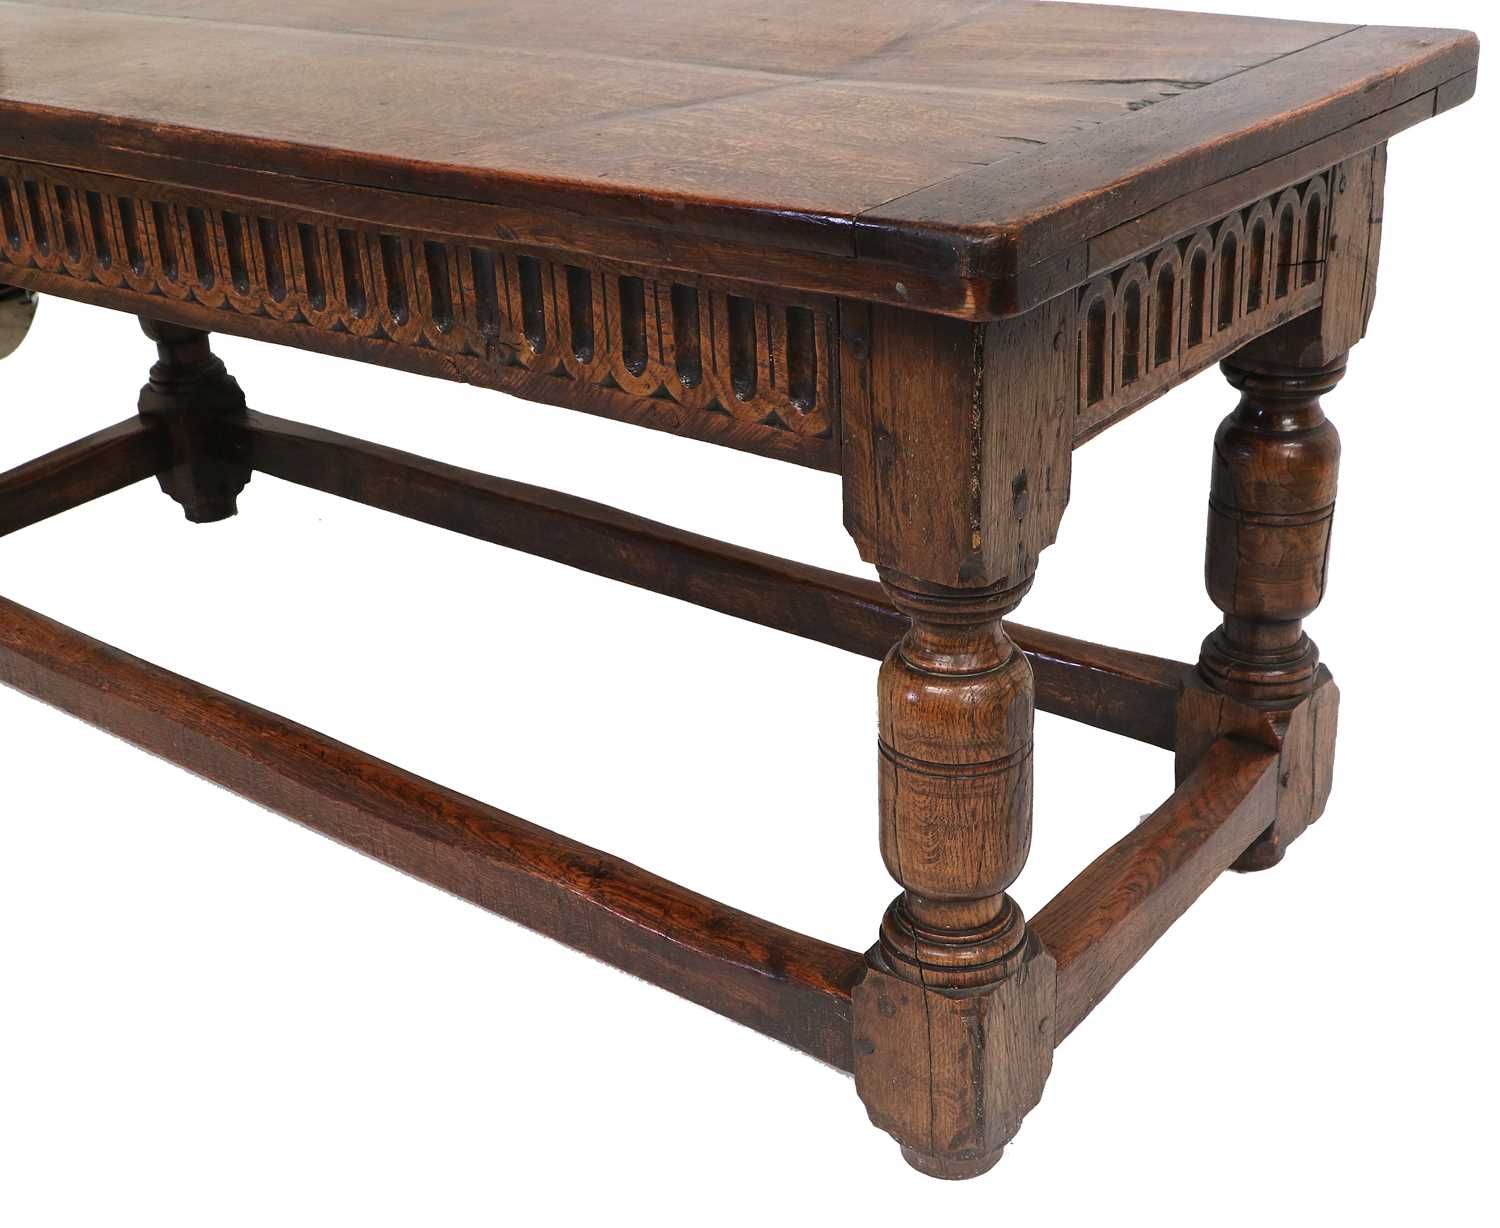 An Early 18th Century Joined Oak Refectory Dining Table, of two-plank construction with cleated ends - Image 3 of 4